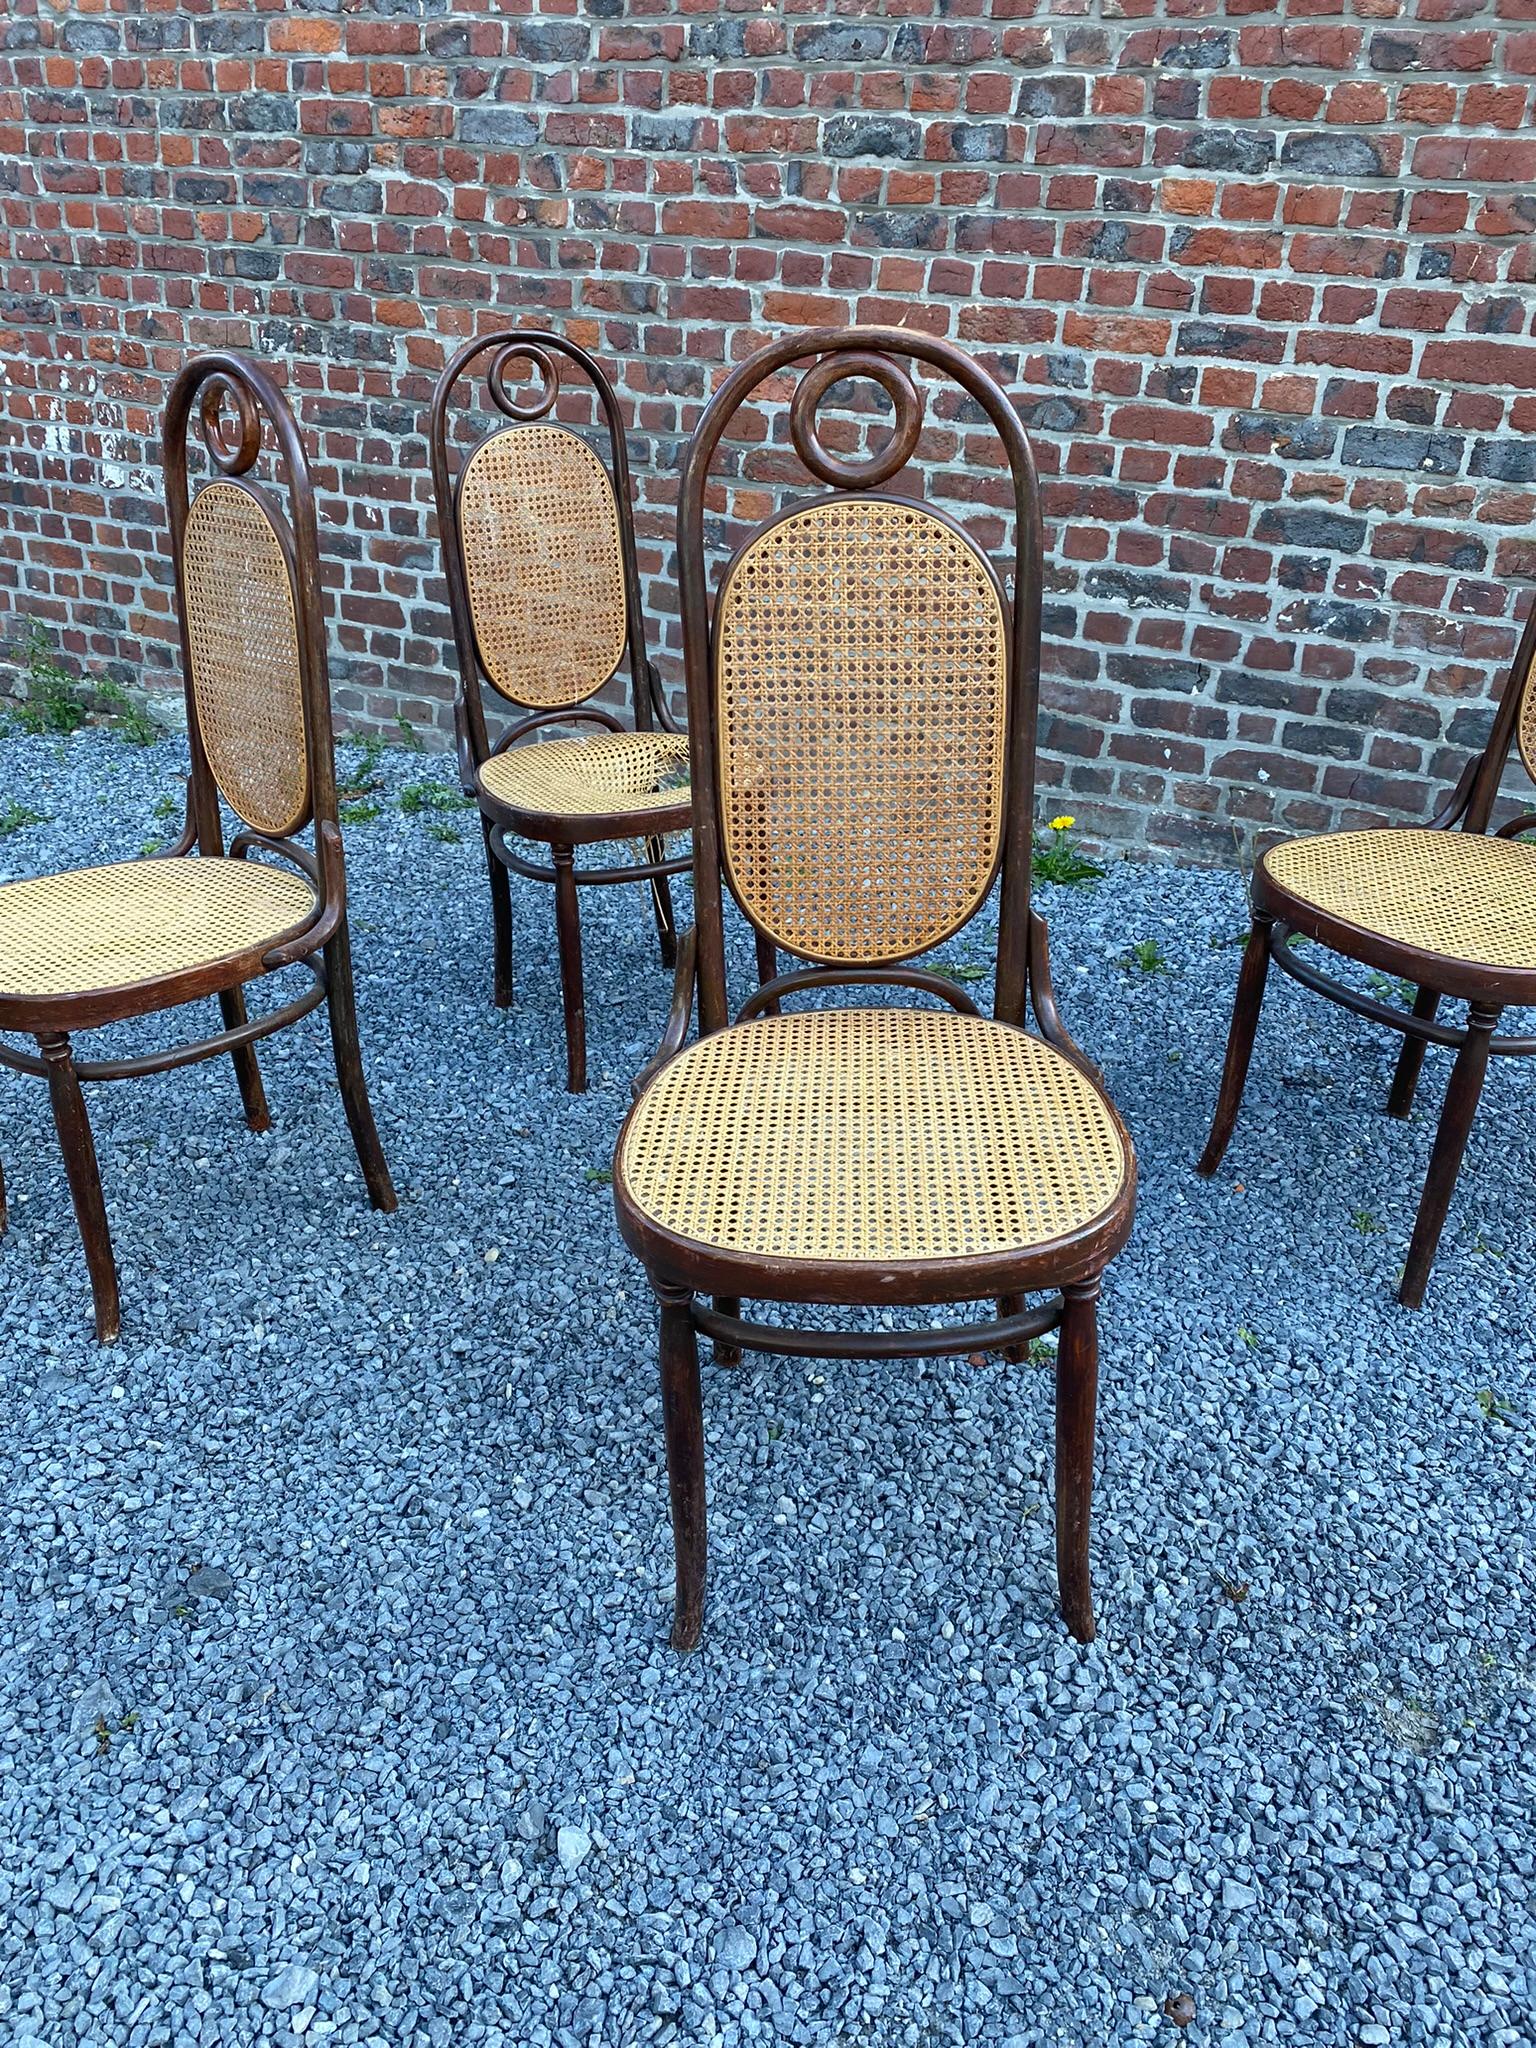 4 Chairs in the Thonet style, circa 1900.
 